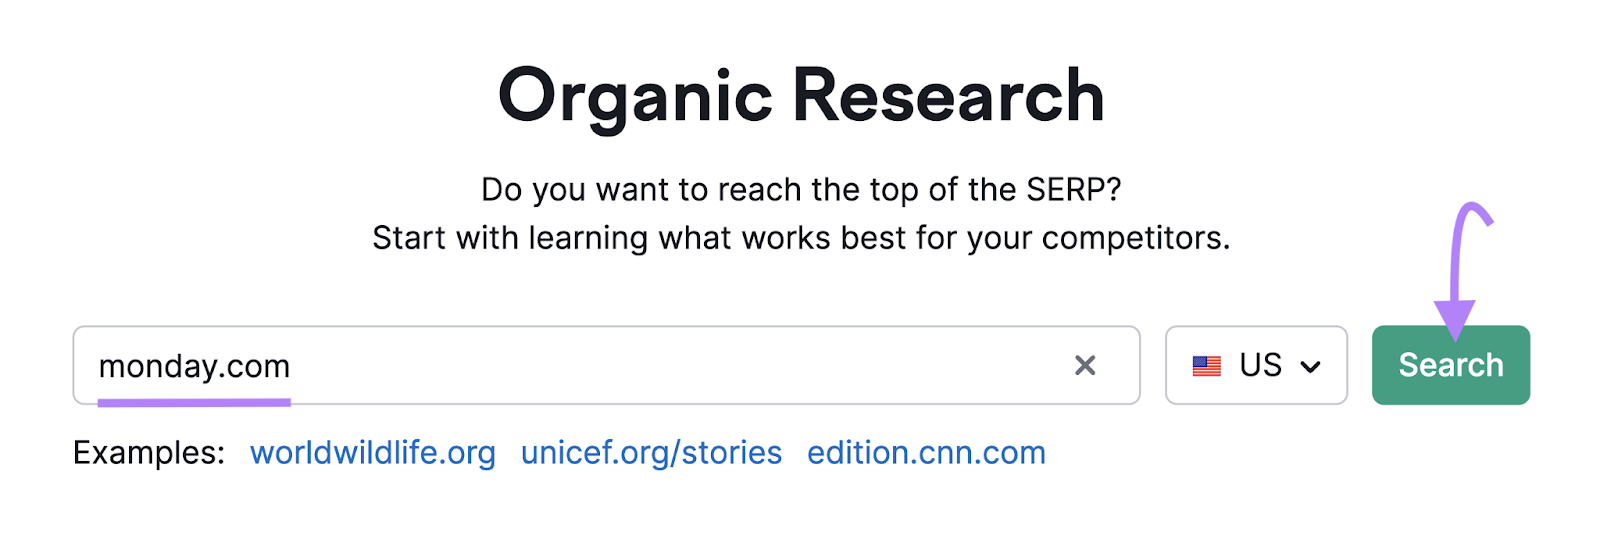 "monday.com" entered into the Organic Research tool